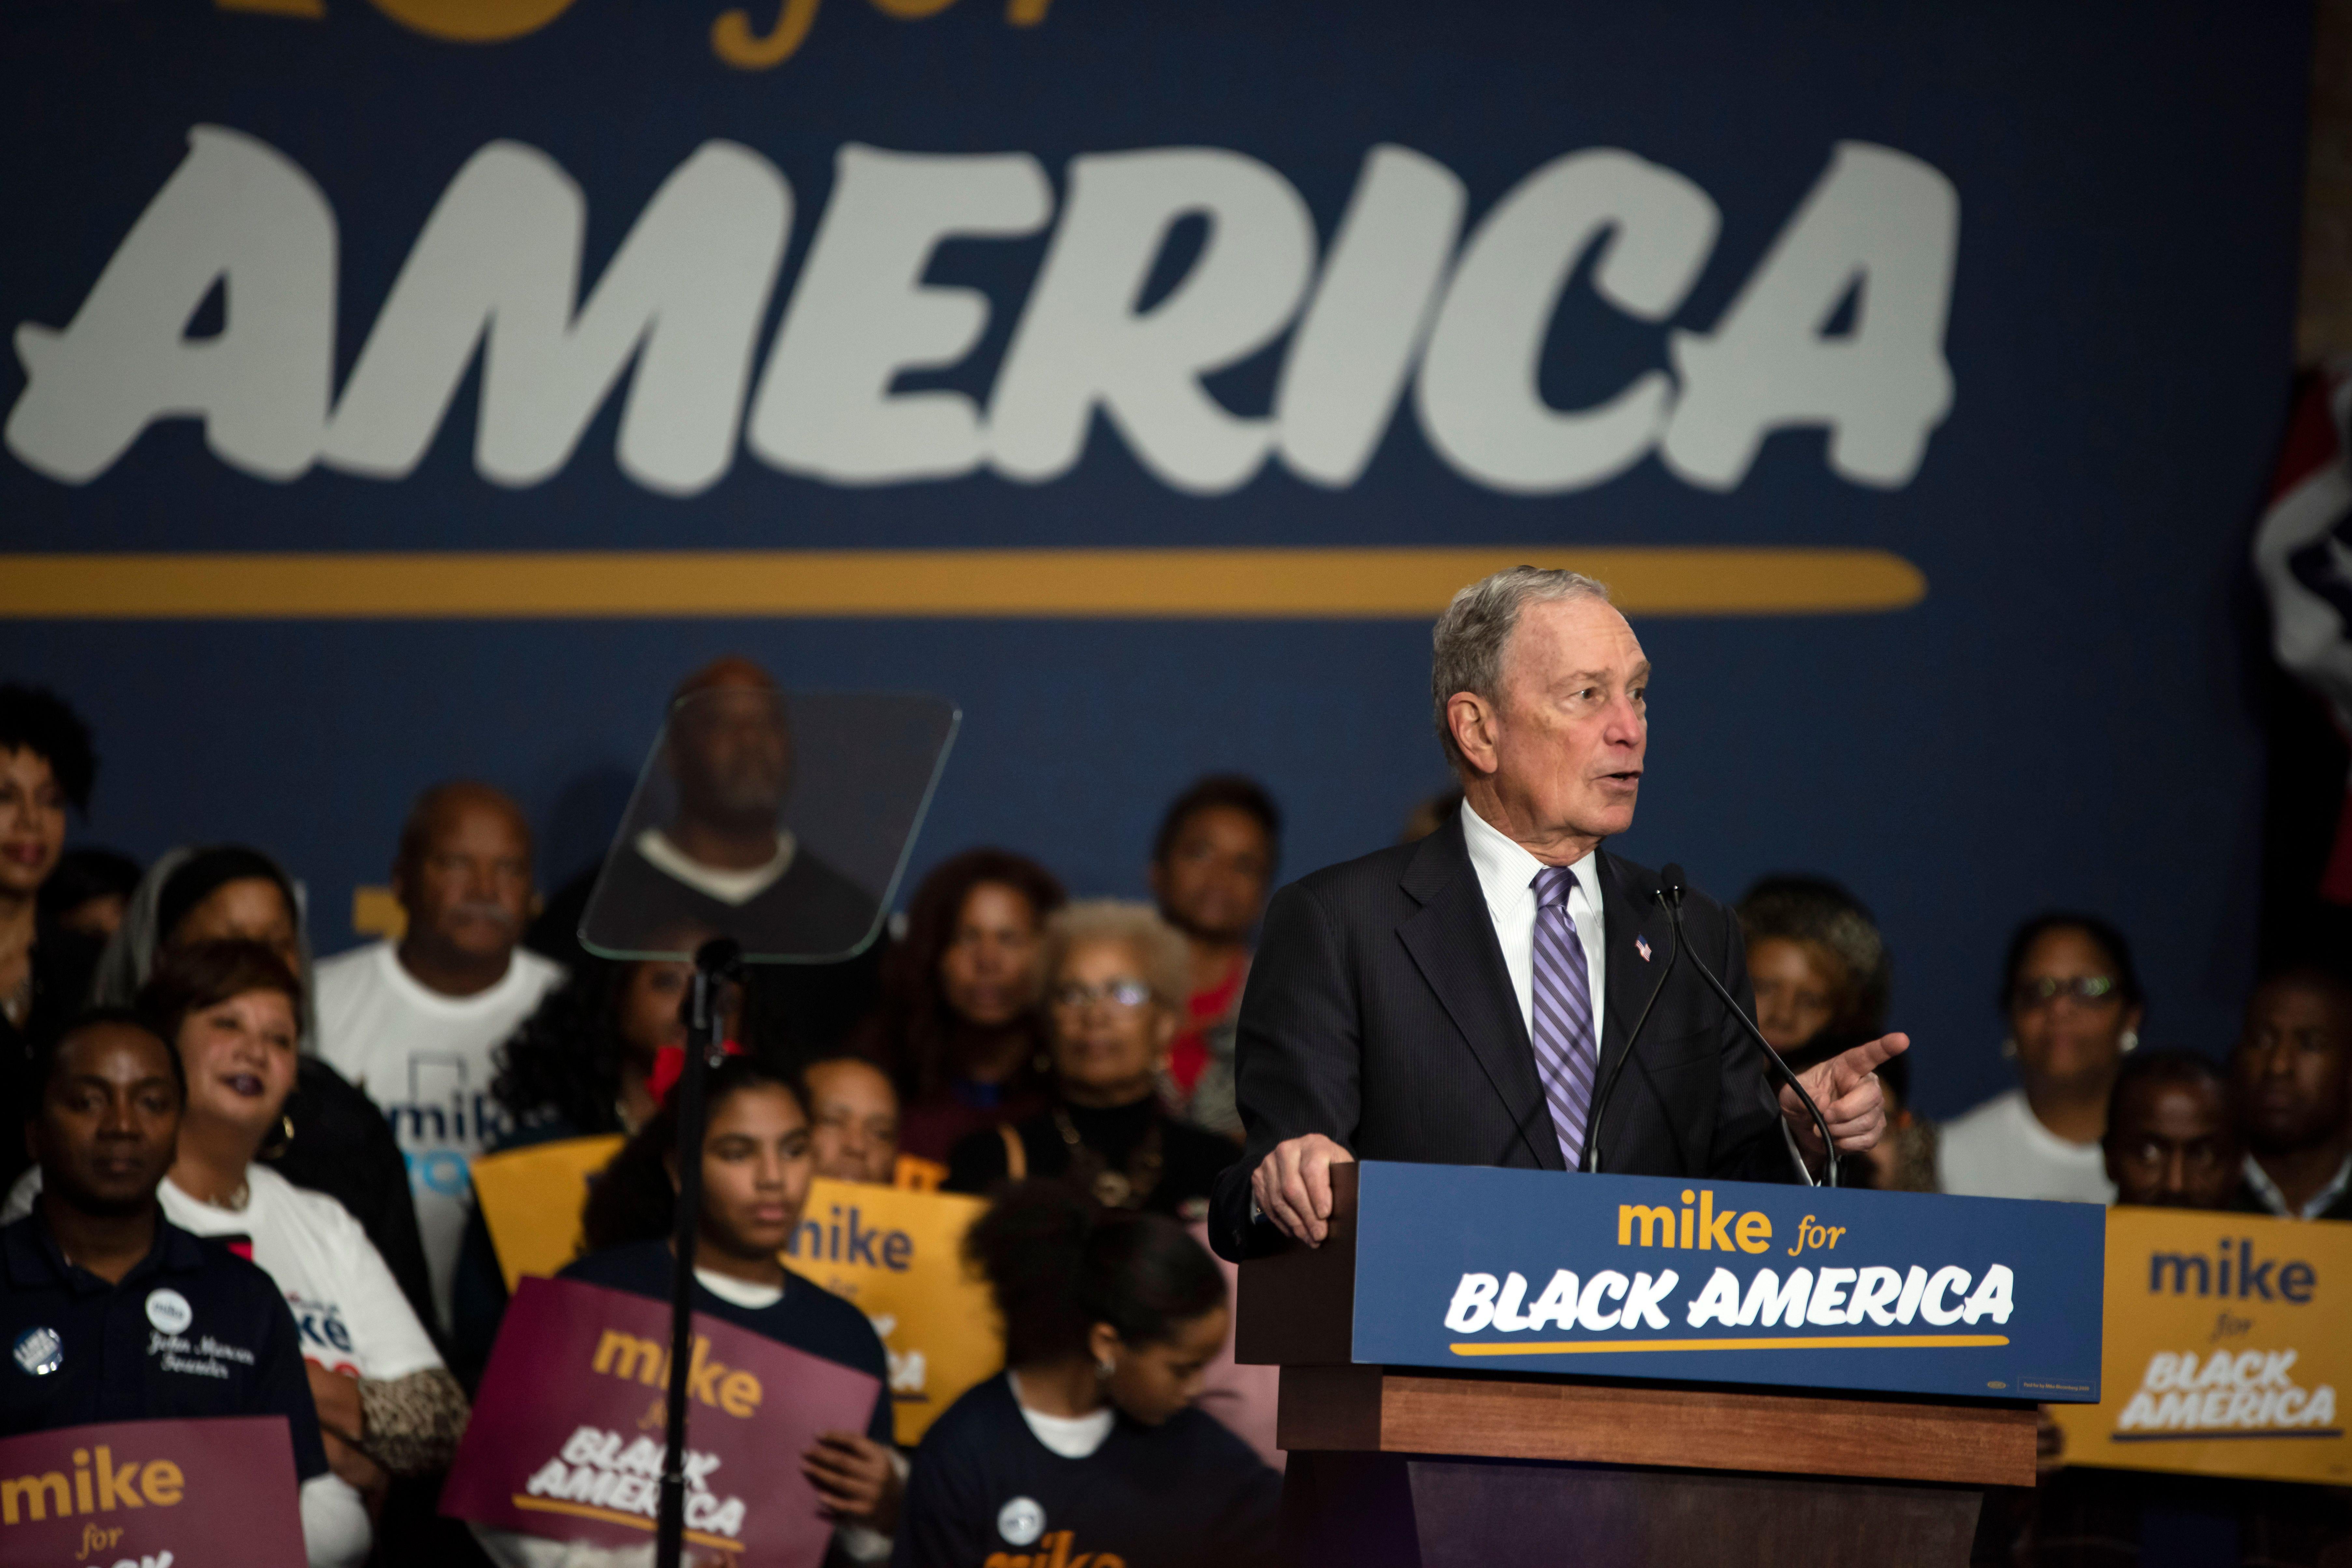 Michael Bloomberg speaks into a podium that says "Mike for Black America," as black supporters sit behind him.